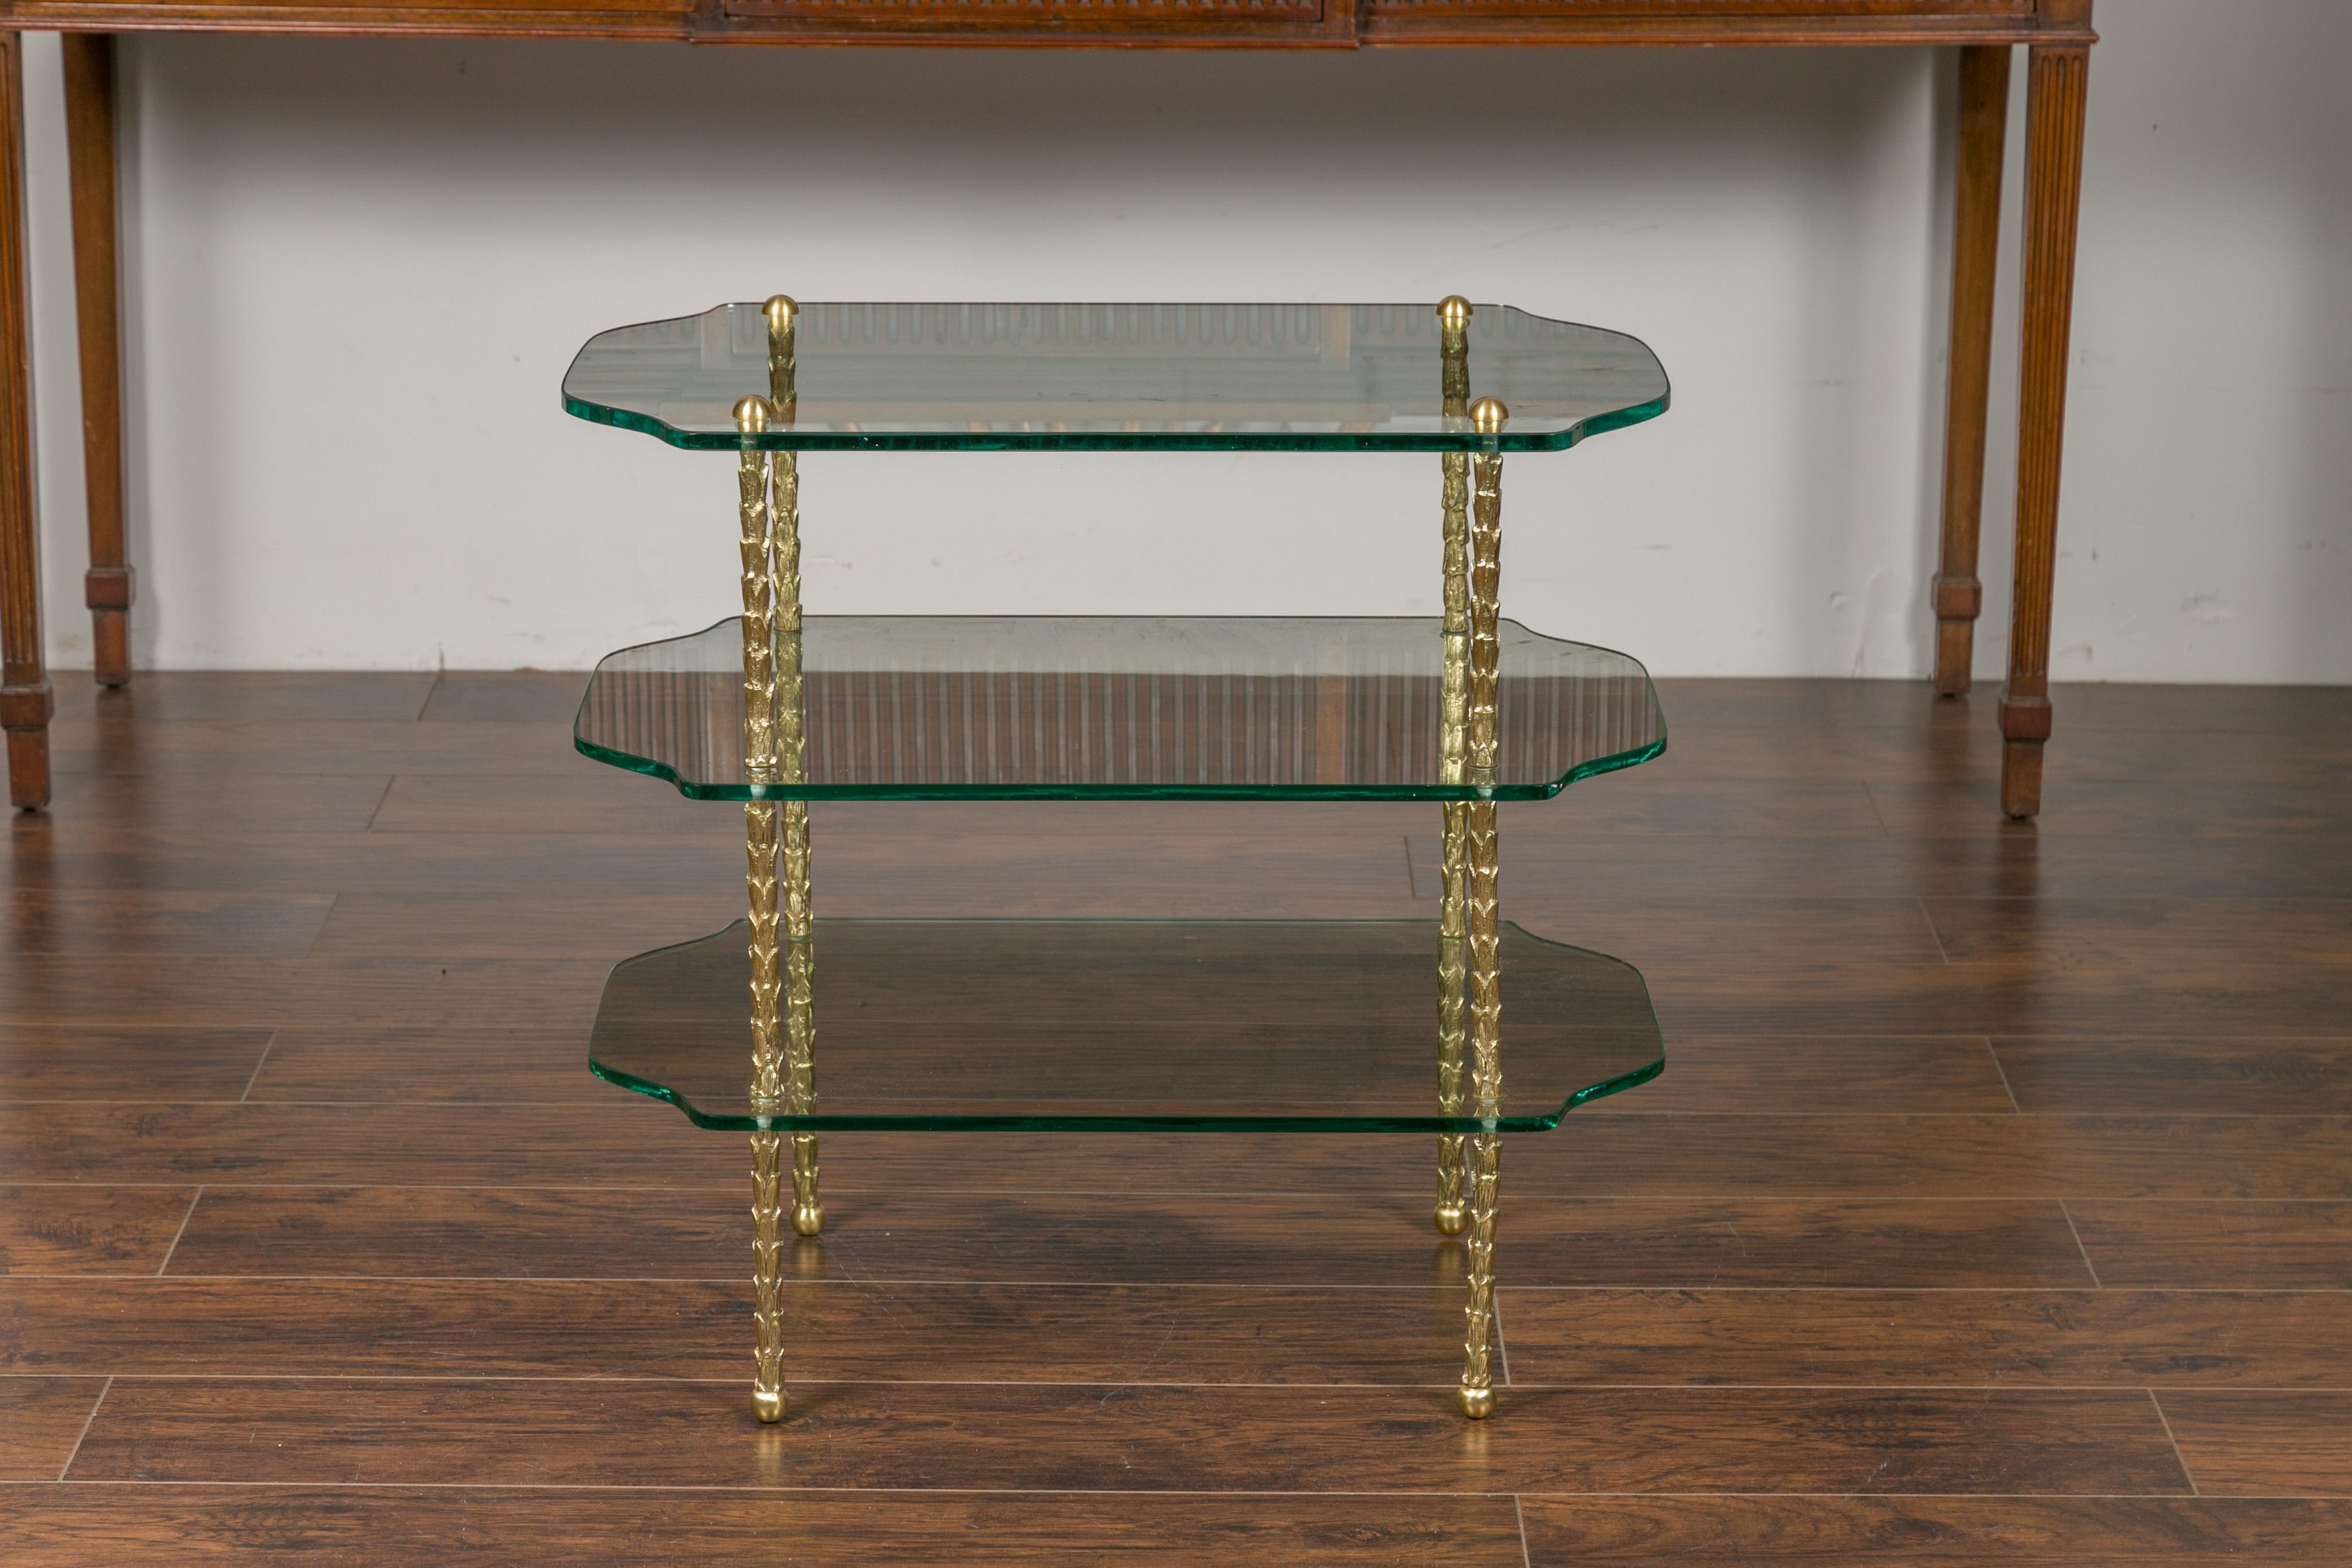 Midcentury Brass Three-Tiered Table with Glass Shelves and Foliage Motifs For Sale 5